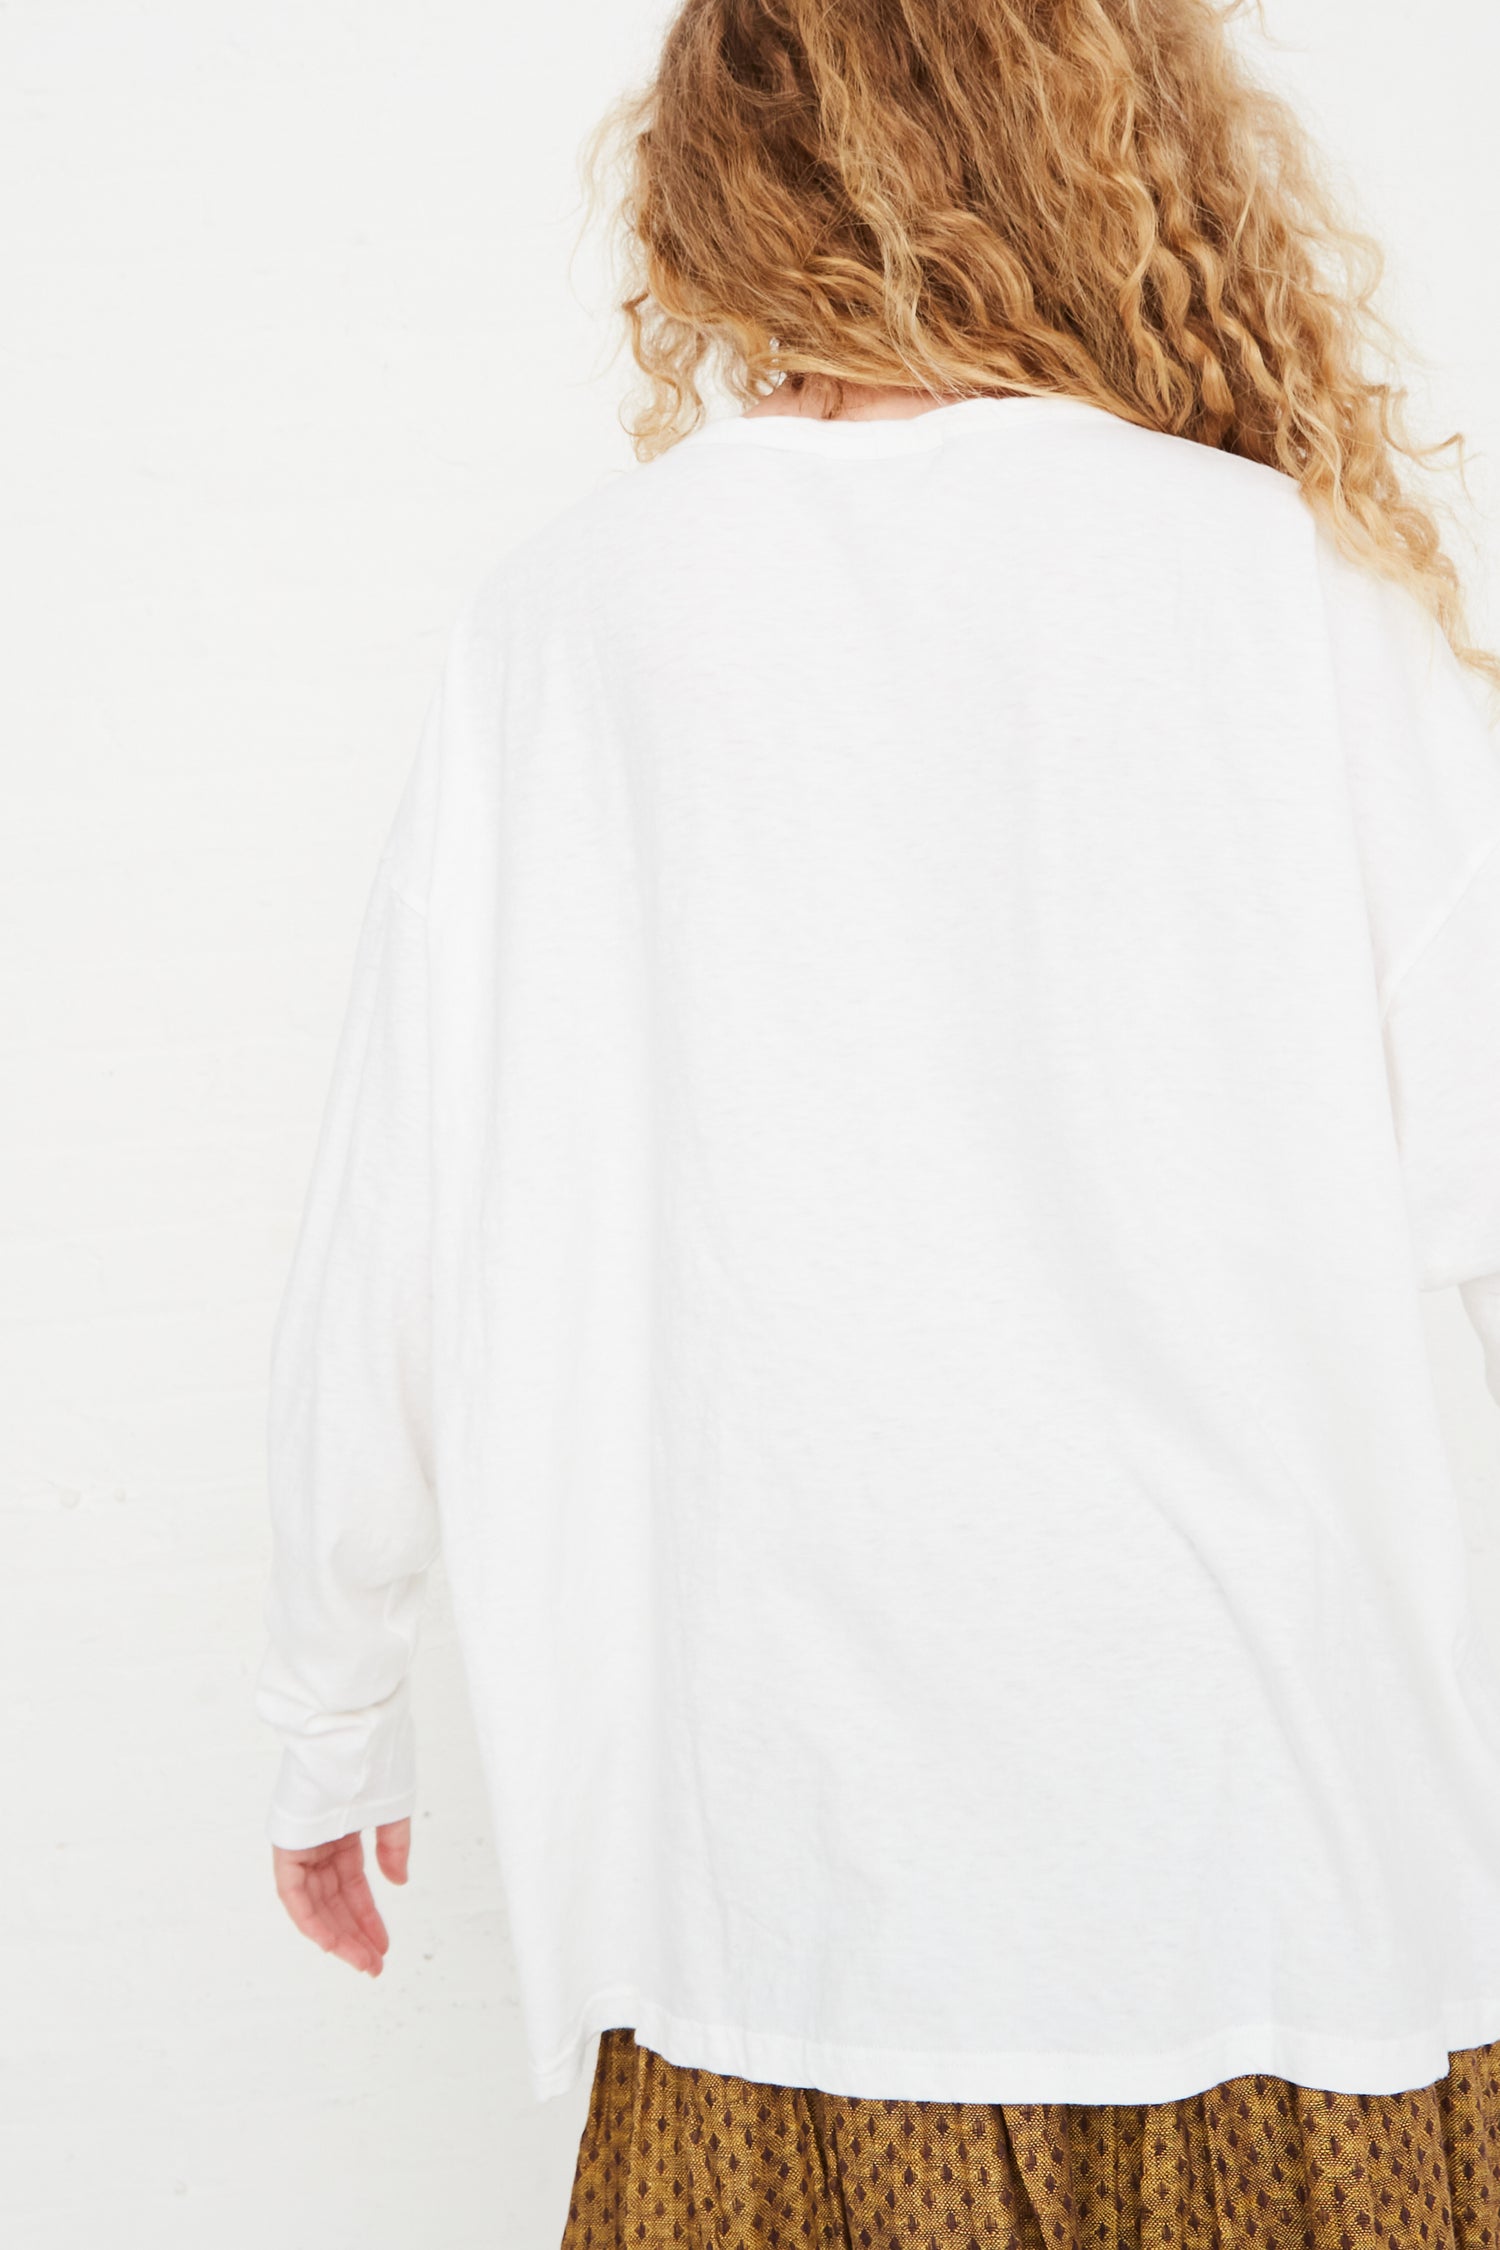 The back of a model wearing an Ichi Antiquités Cotton Loose Pullover in White made of thick cotton.